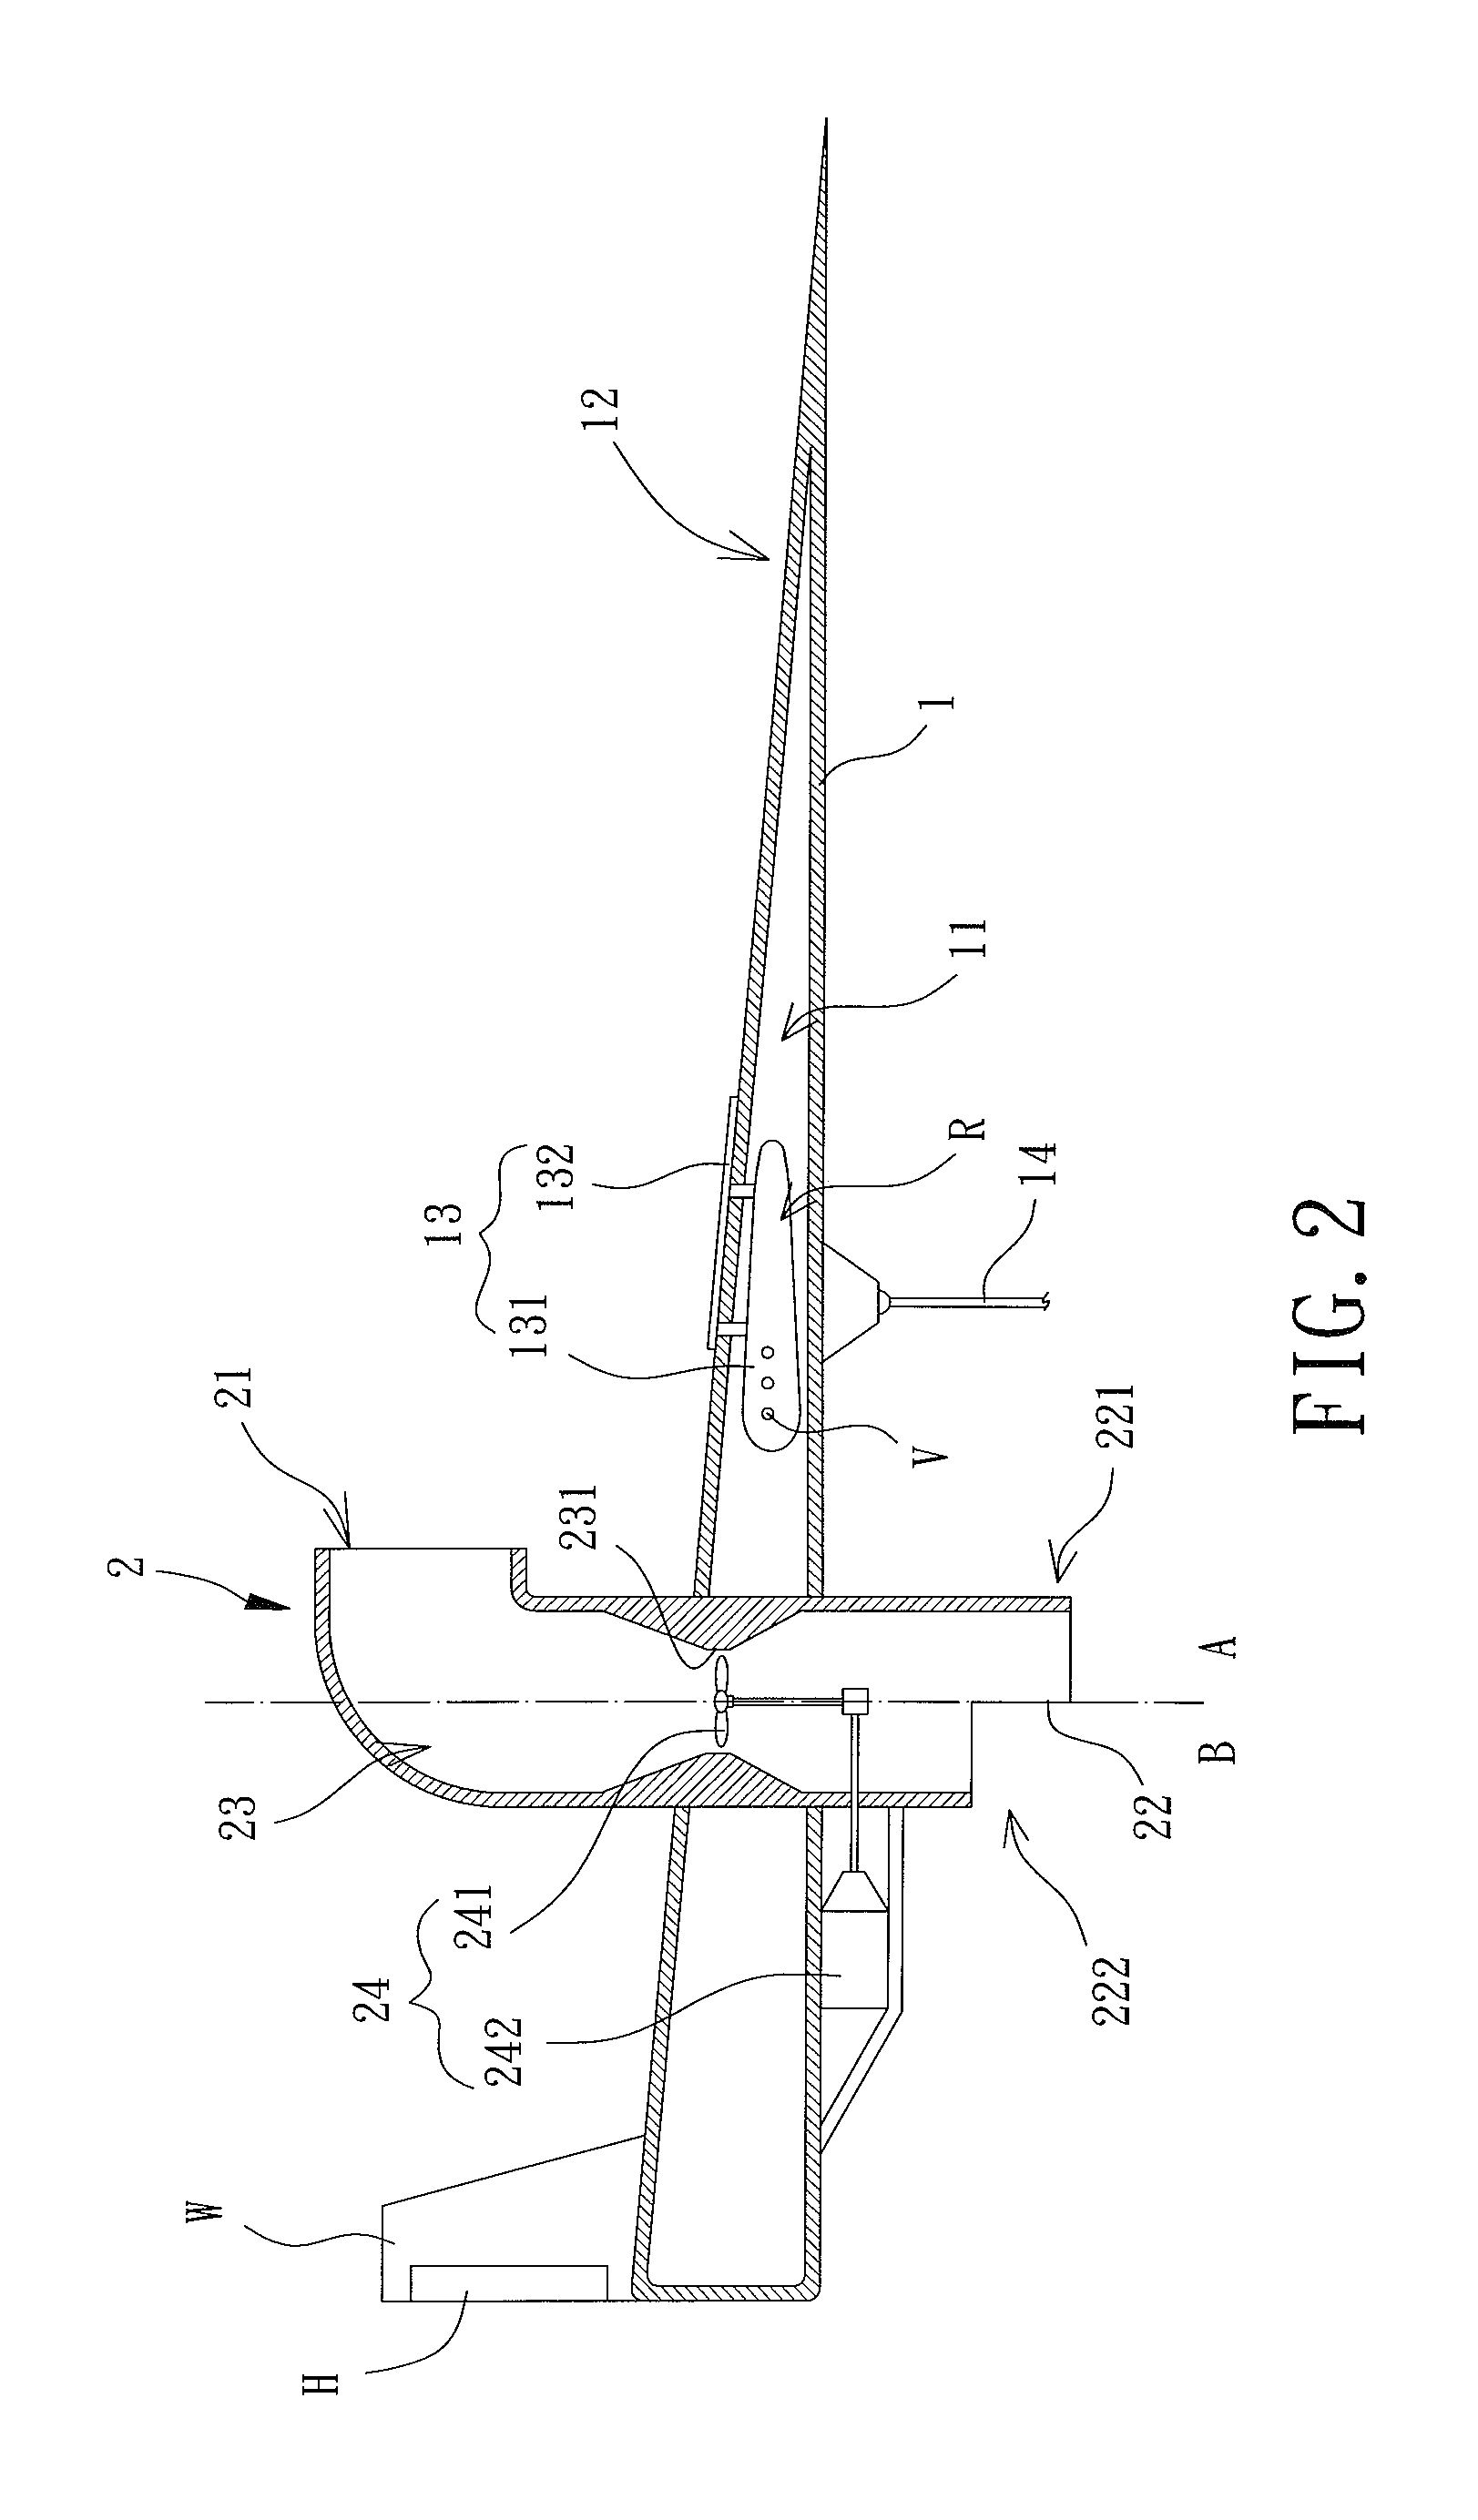 Eddy Carrier Type Wind Power Collection Device